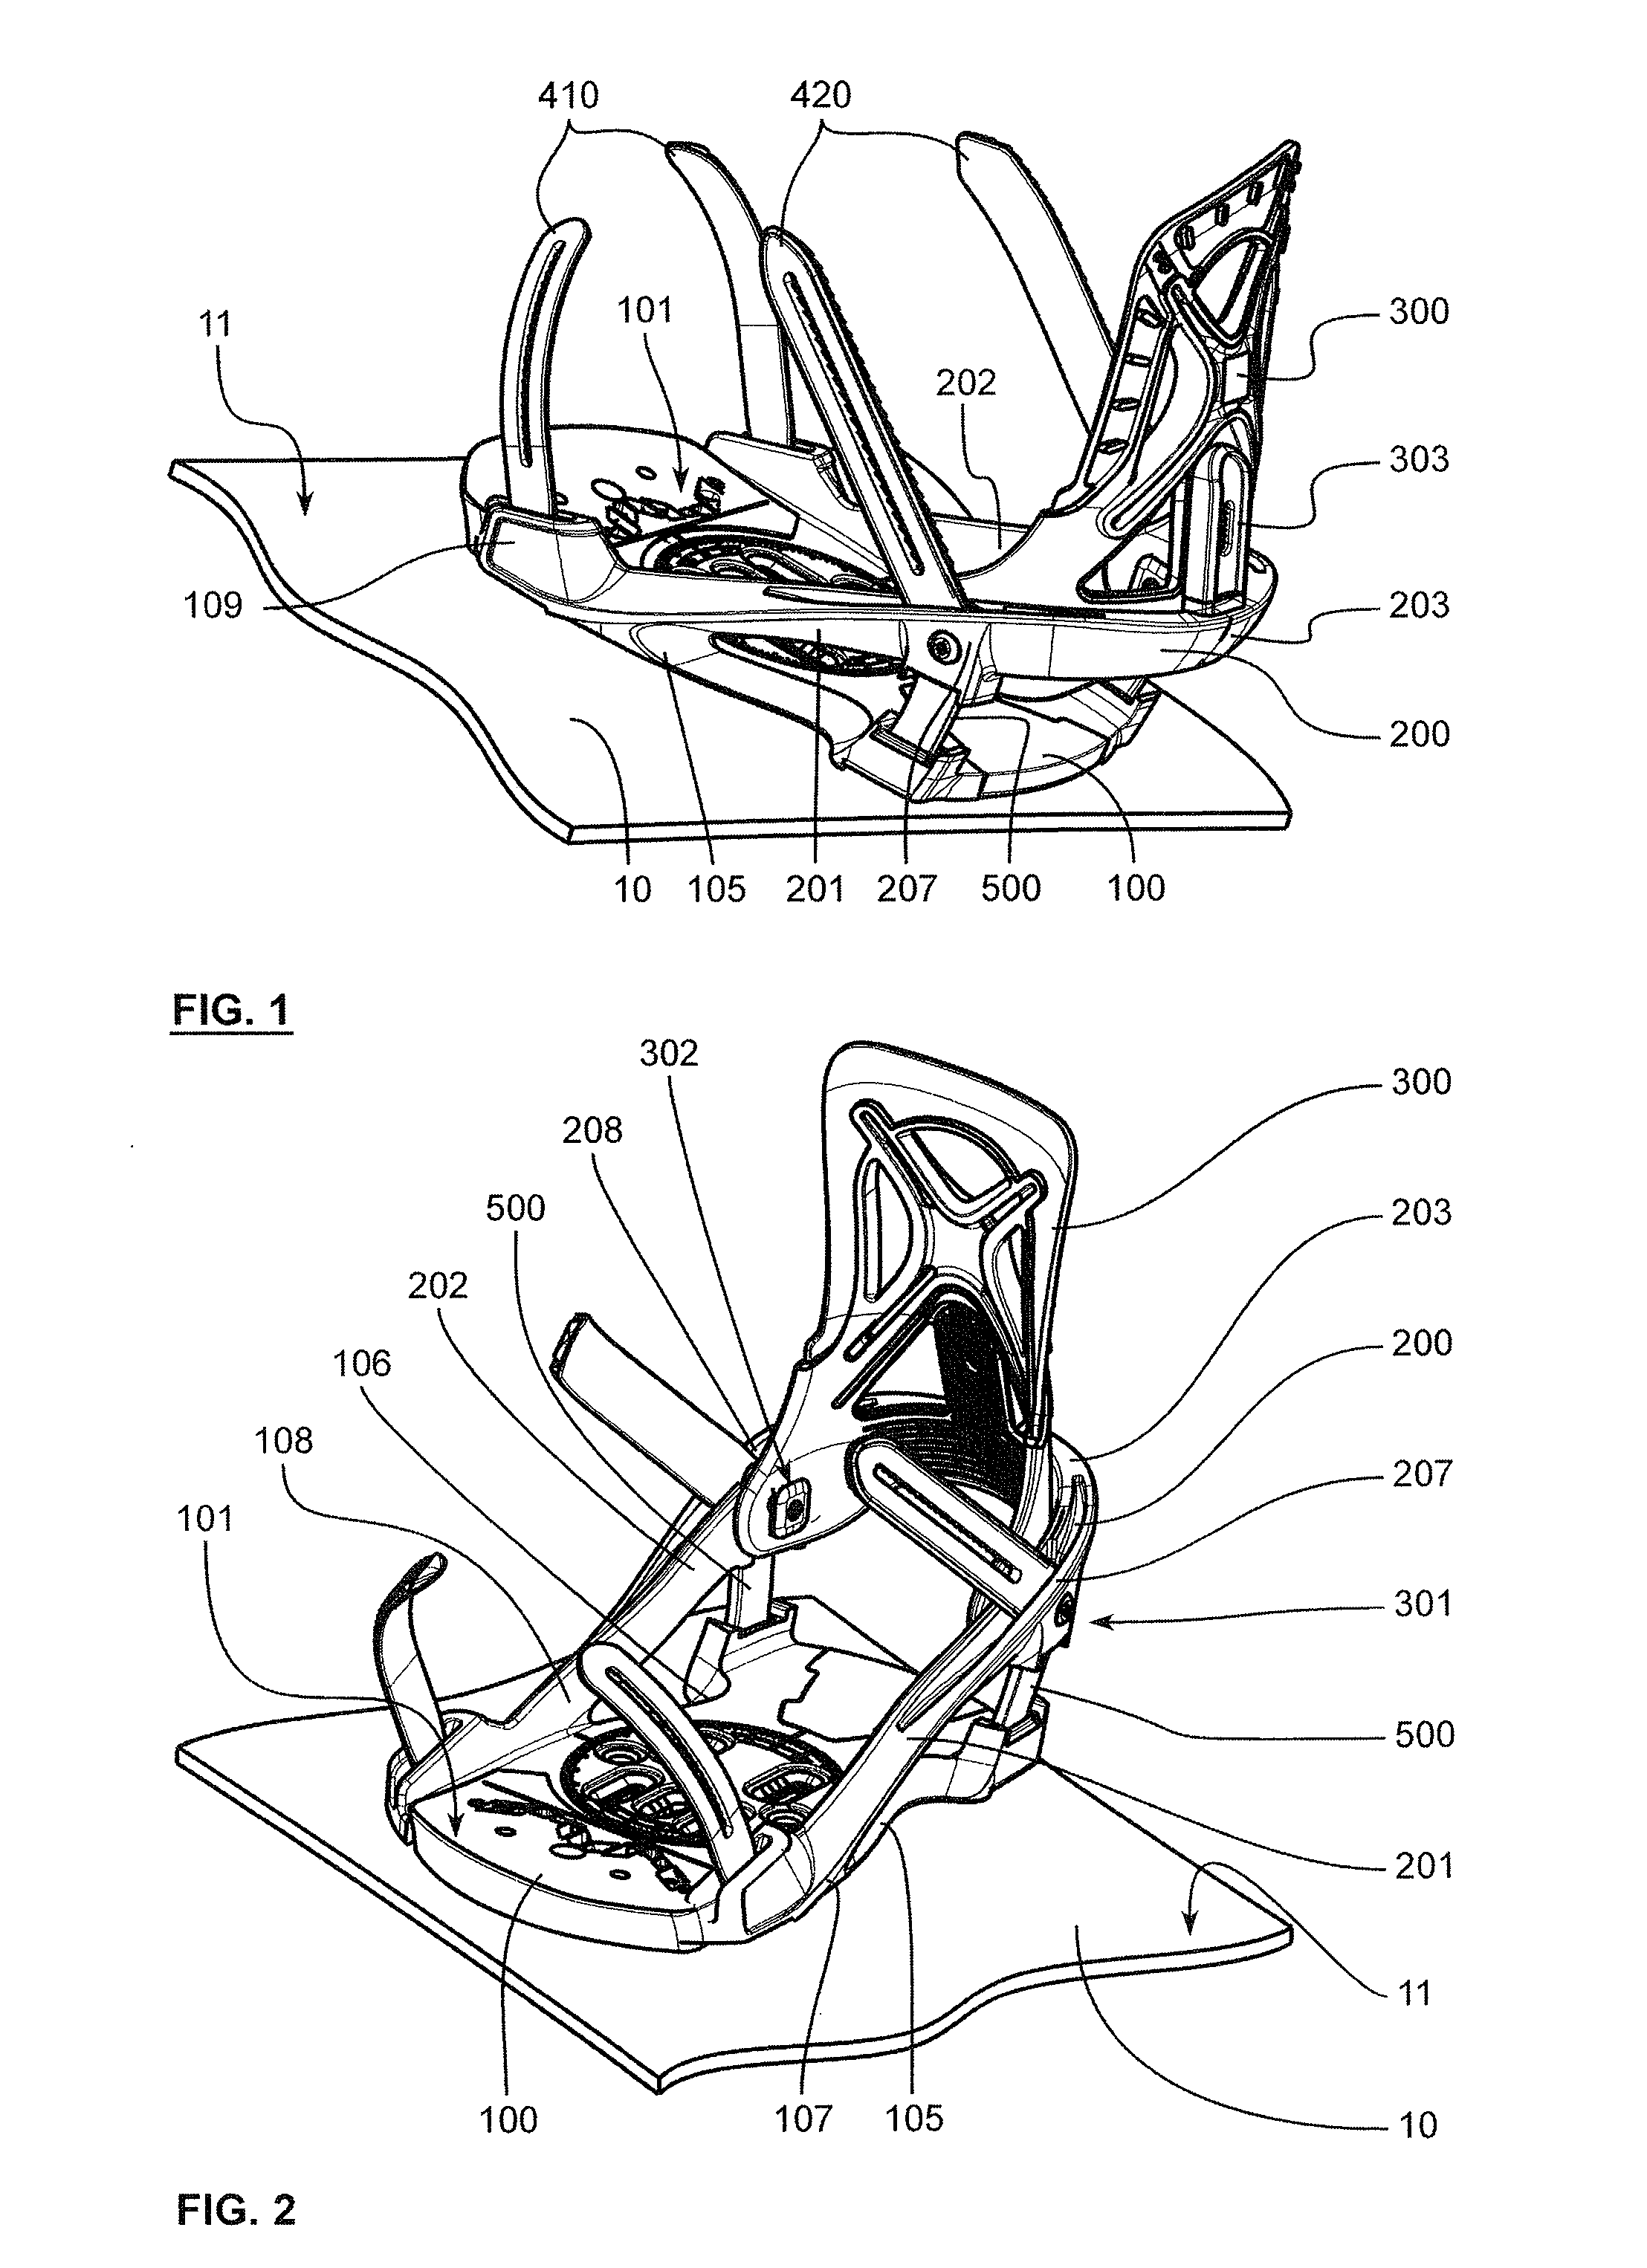 Device for receiving a boot on a gliding apparatus